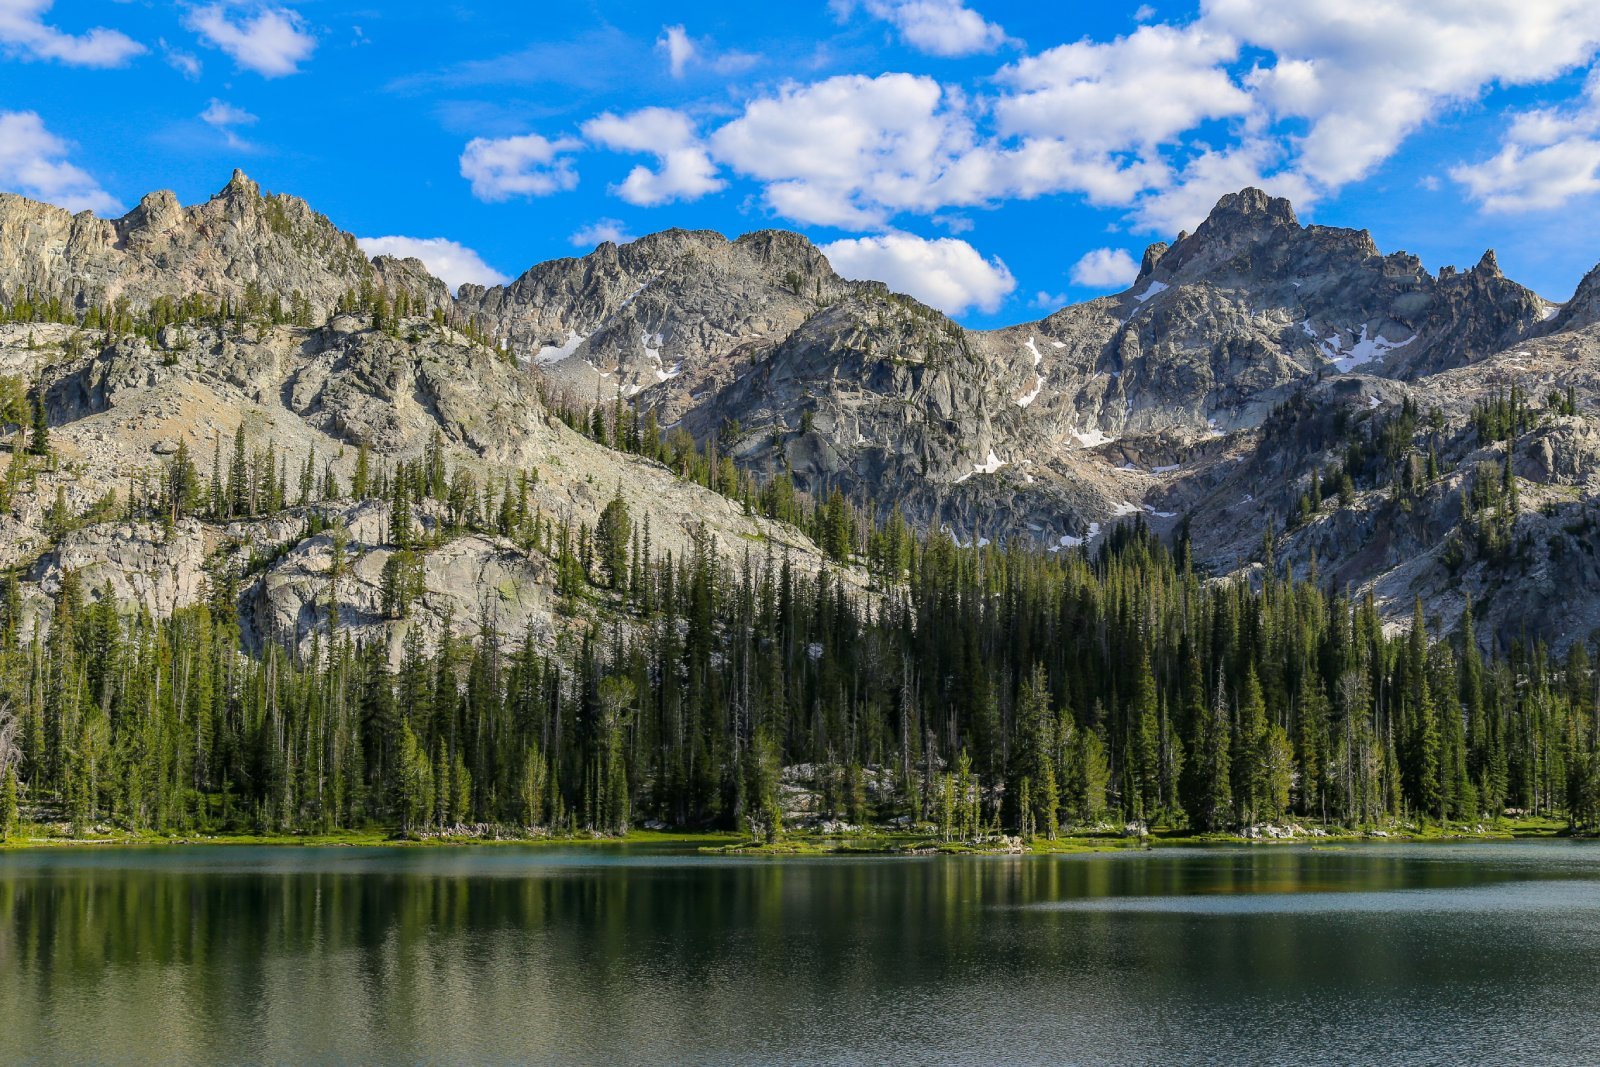 <p class="wp-caption-text">Image Credit: Shutterstock / CSNafzger</p>  <p><span>Beyond its potato fame, Idaho boasts stunning natural beauty, from the wilderness of the Sawtooth National Forest to the adventure-rich Sun Valley.</span></p>